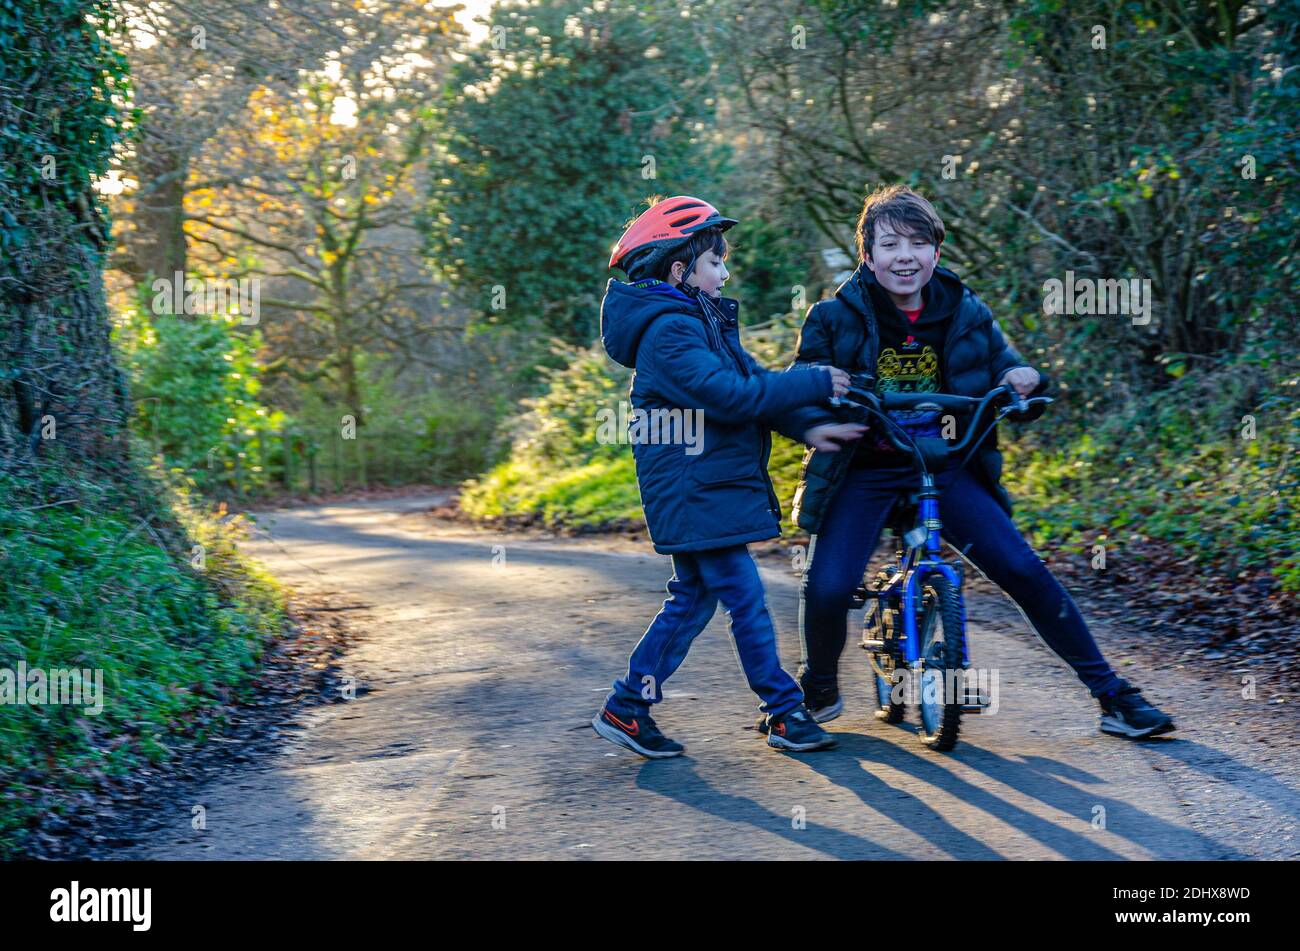 An older brother sits on his younger brothers bicycle down a country lane. Stock Photo